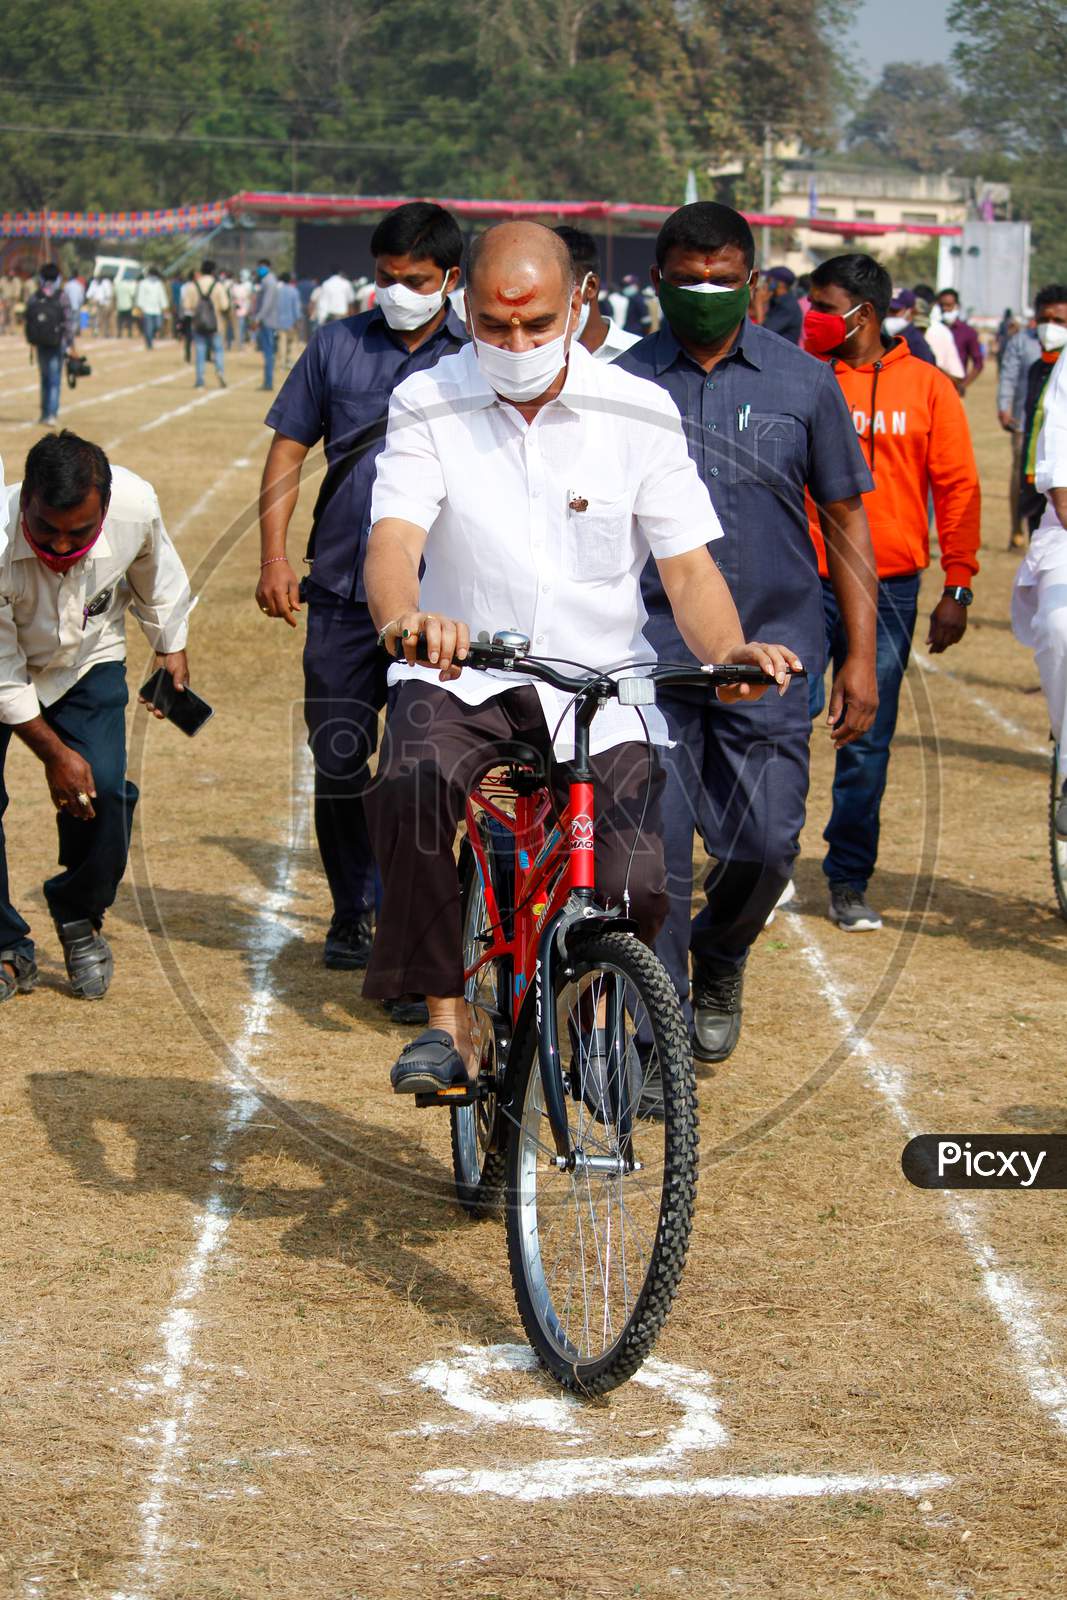 Dasyam Vinay bhasker cycling at Cycles4change event